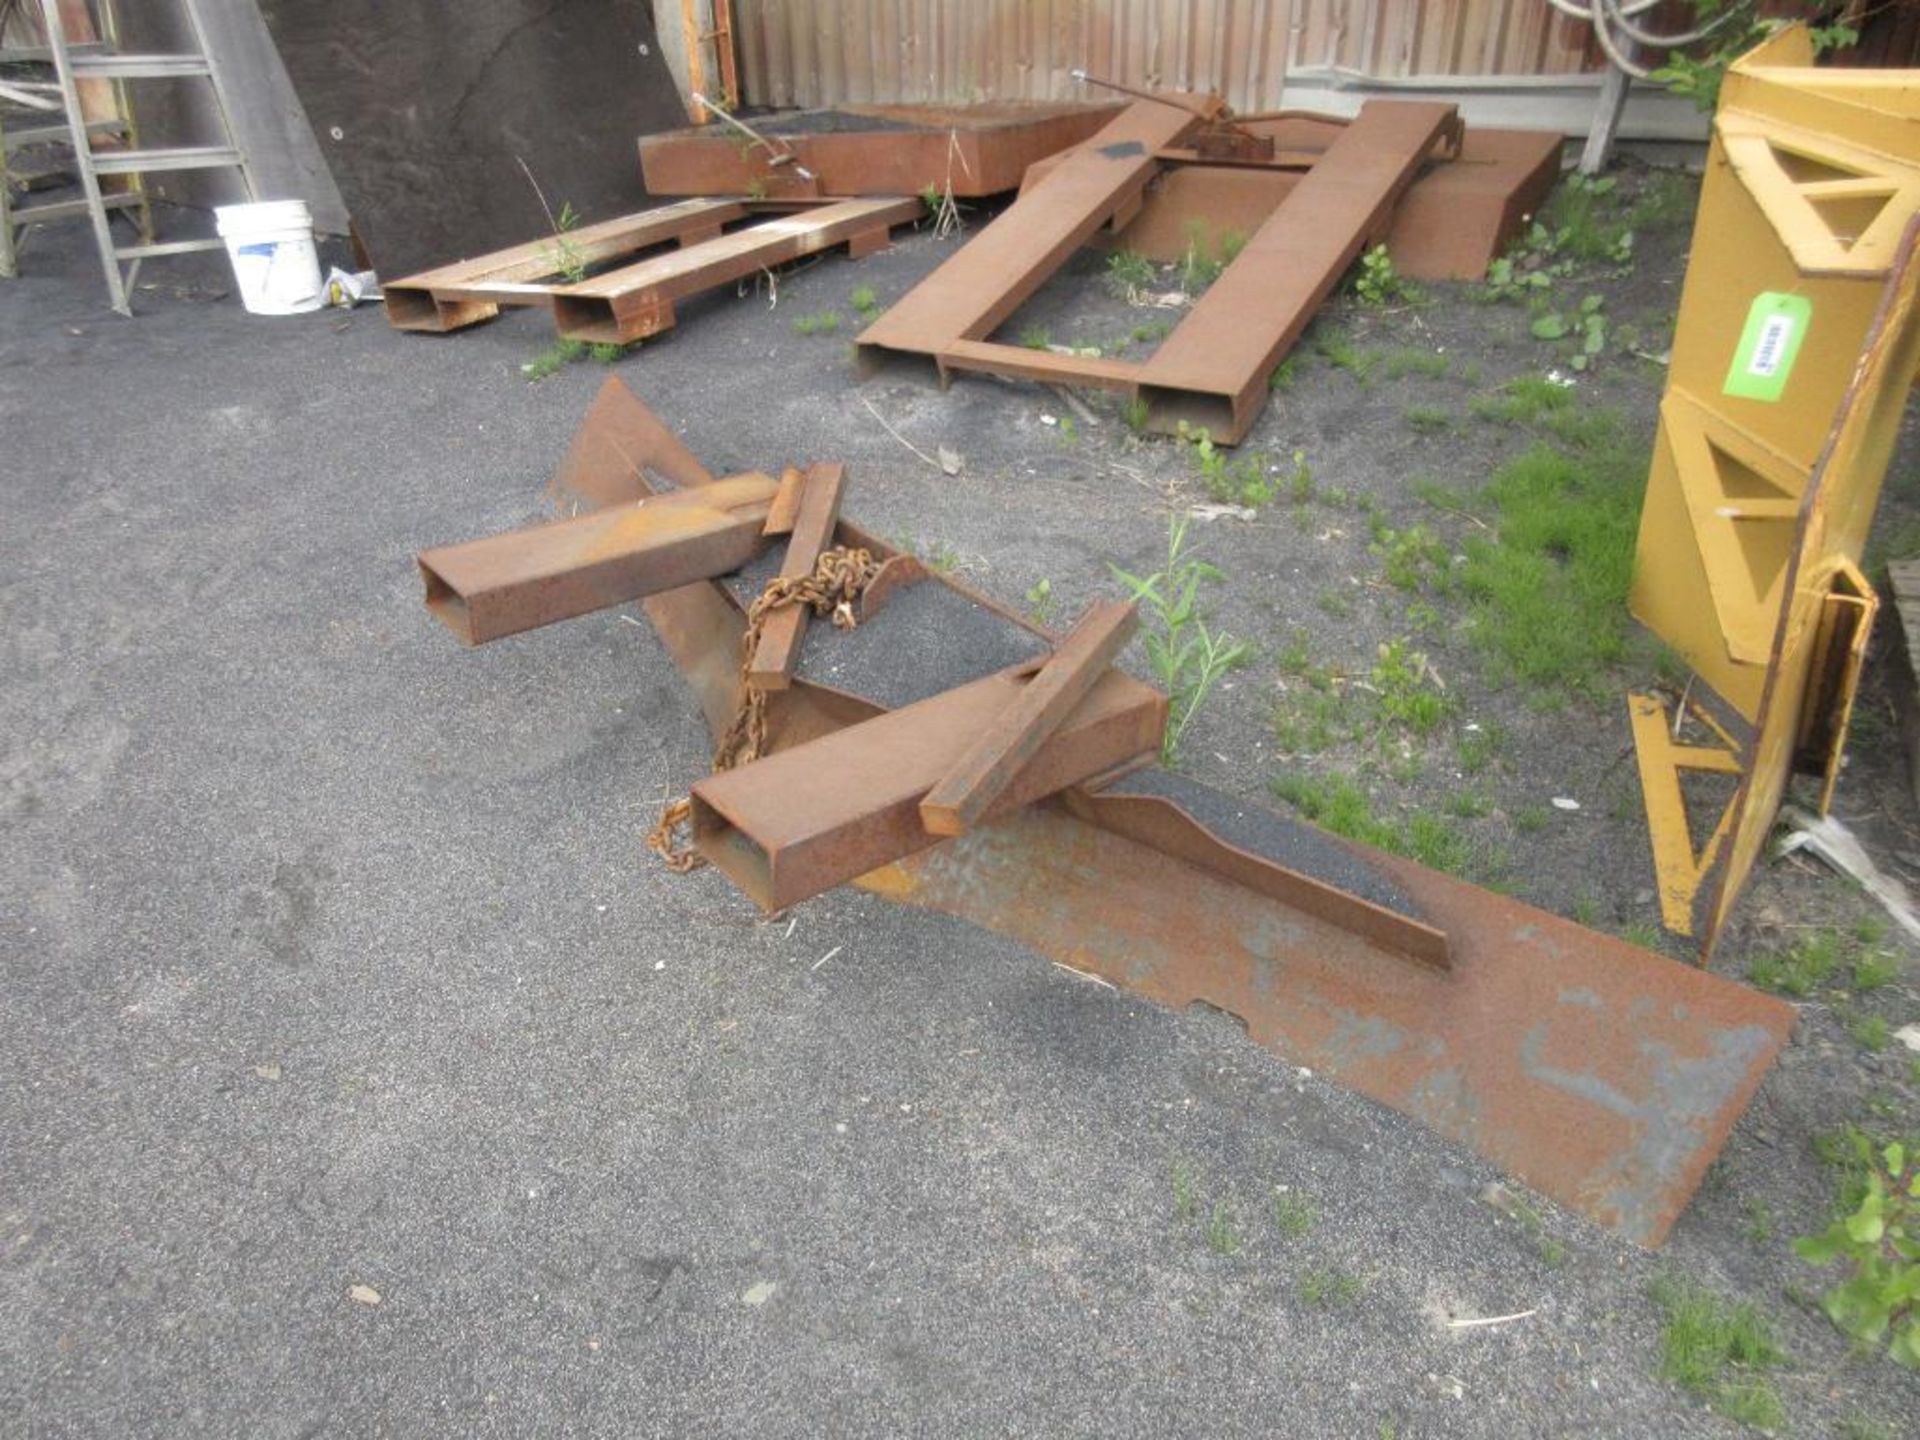 LOT OF 6 SNOW PLOUGH IBG.GRATING FOR TRUCK ATTACHMENTS (NORTH PAINT BLDG) - Image 4 of 14